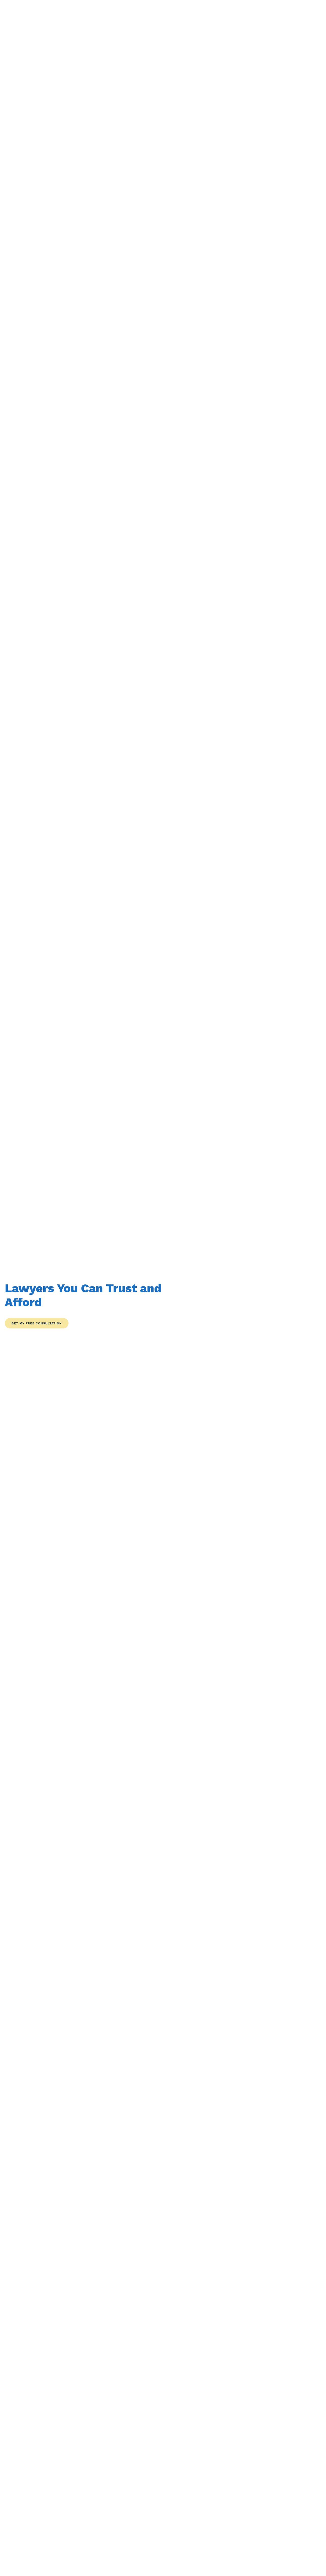 Southern Legal Clinics - Metairie LA Lawyers